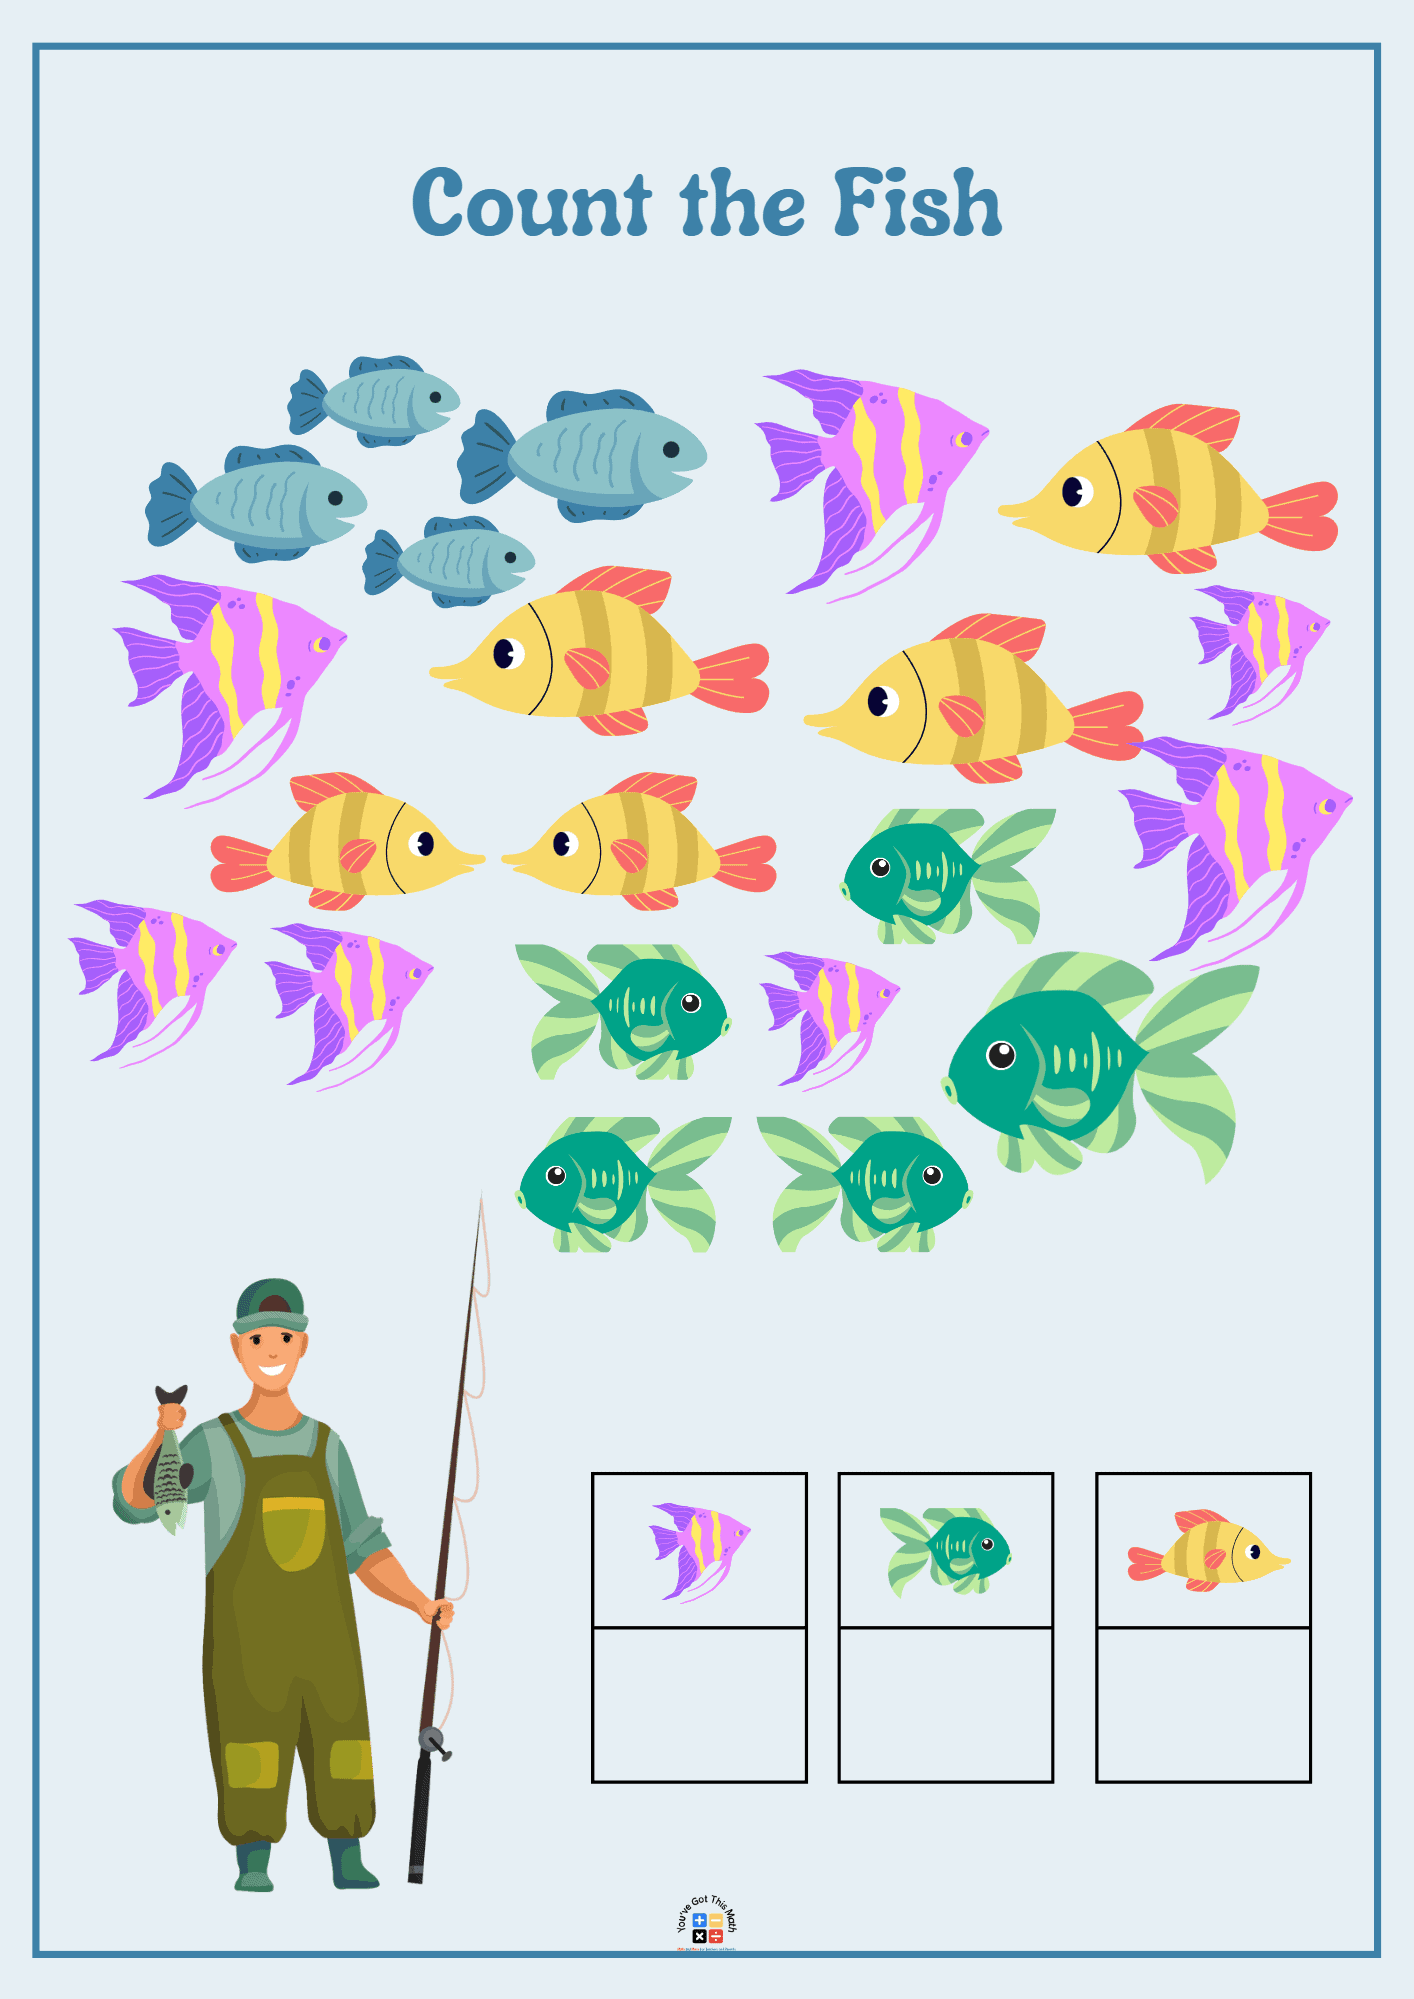 Count the fishes in Counting Fish Game